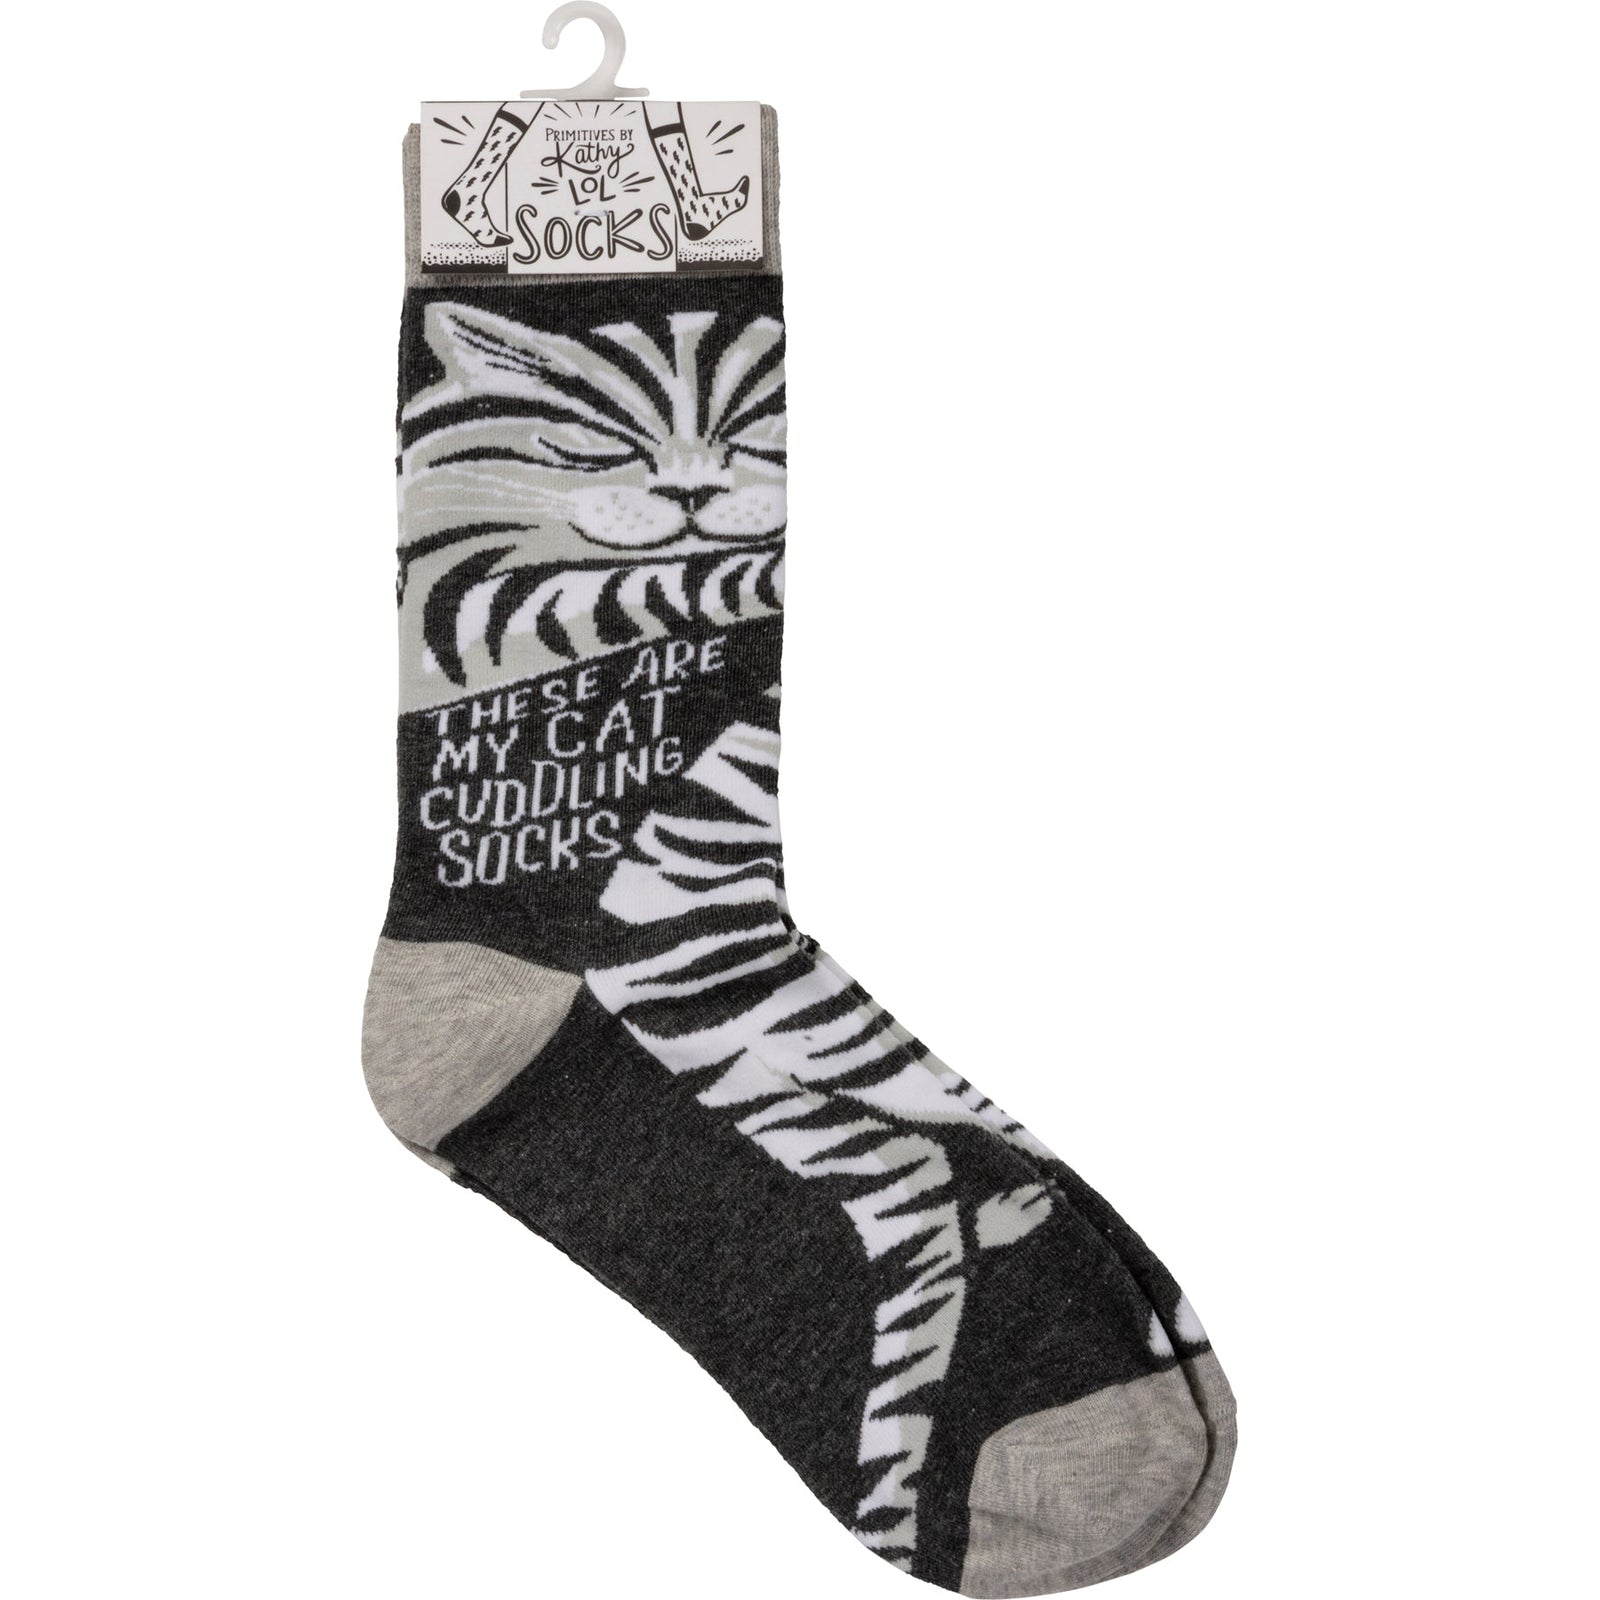 These Are My Cat Cuddling Socks Funny Novelty Socks with Cool Design, Bold/Crazy/Unique/Quirky Specialty Dress Socks